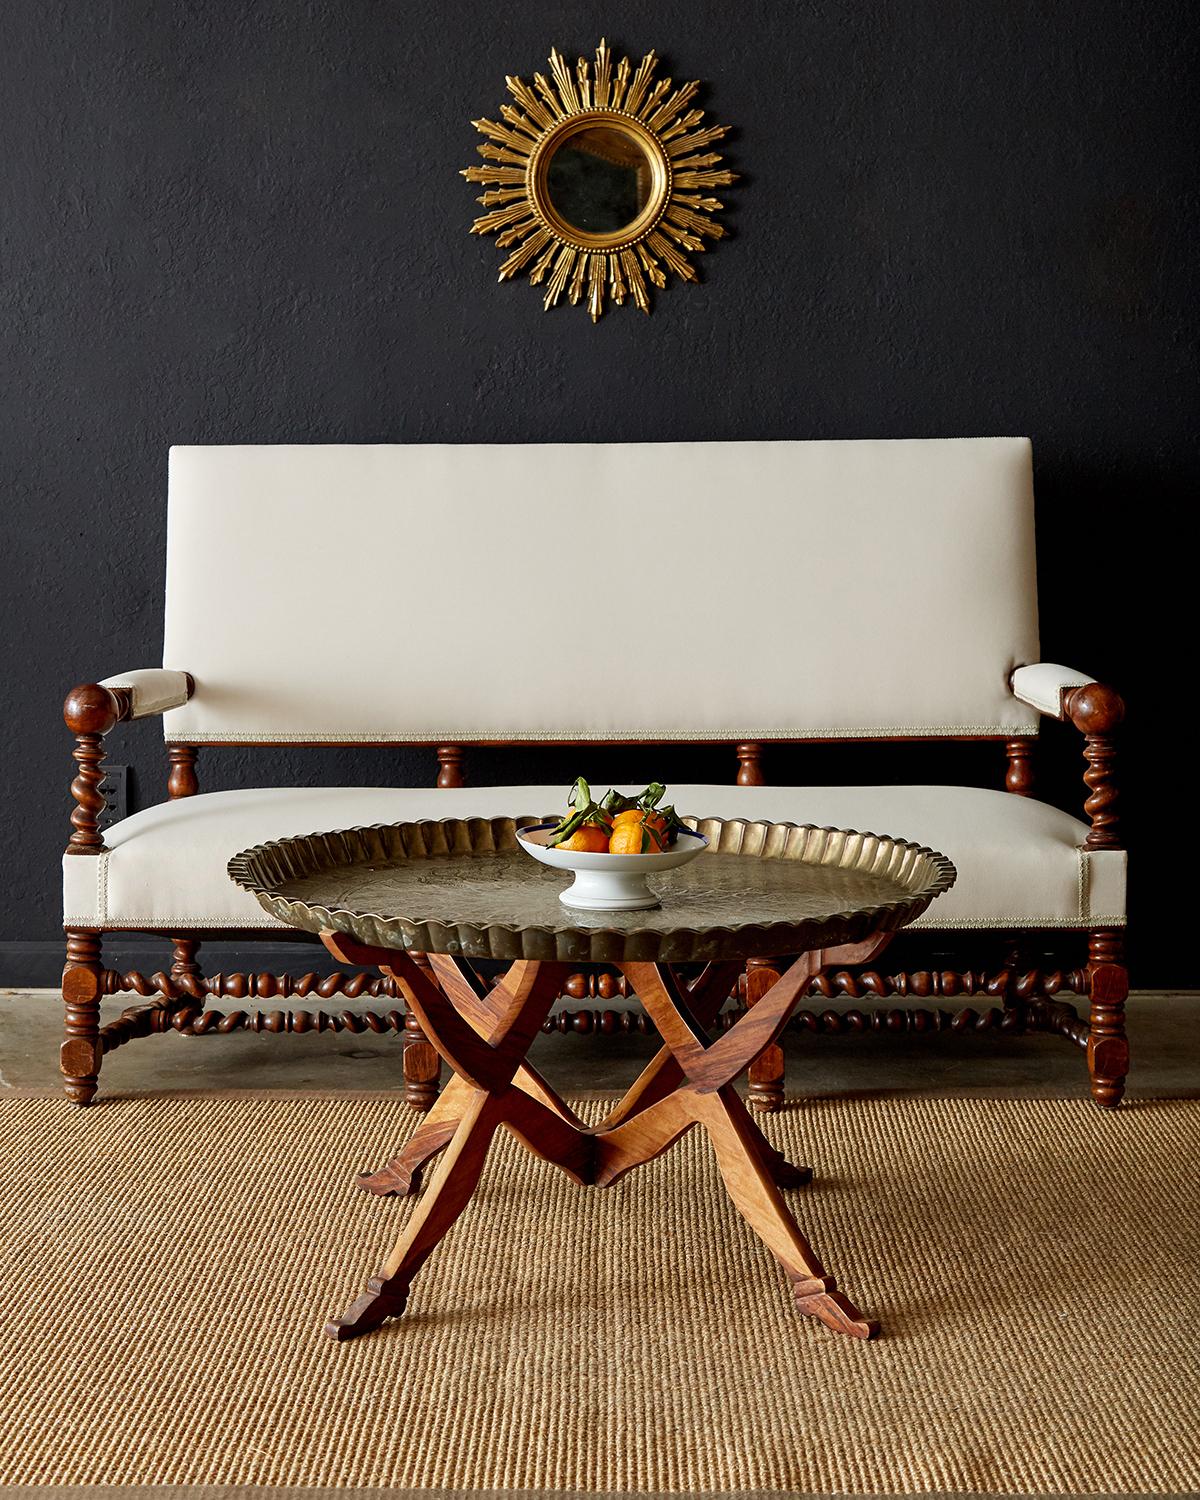 Chic Moroccan brass tray table featuring a folding mahogany base with figural arms and legs holding the large brass tray top. The Moorish Moroccan brass tray has a floral motif sunburst design on top and a traditional scalloped edge. The custom